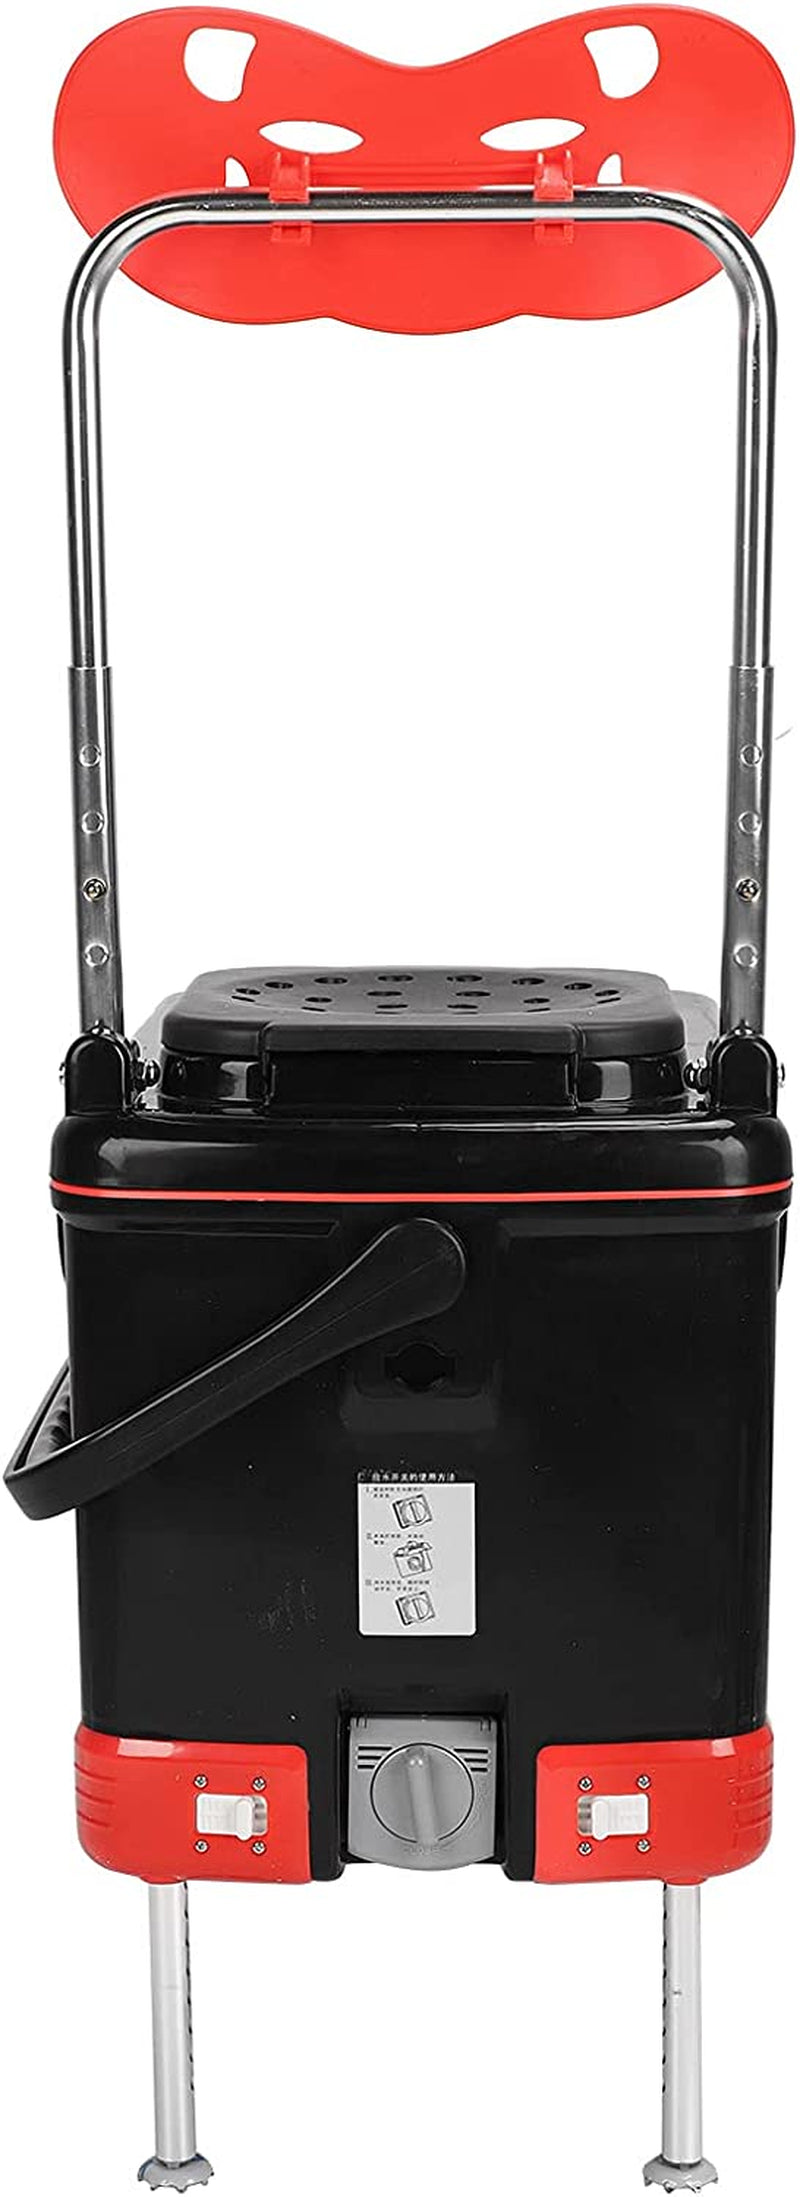 Tackle Box, 32L Multifunctional Fishing Tackle Box Tool Storage and Transport Box with Turret Tray Fish Tray Bait Tray, Foldable Fishing Tackle Box 20.1 X 12.2 X 14.6In